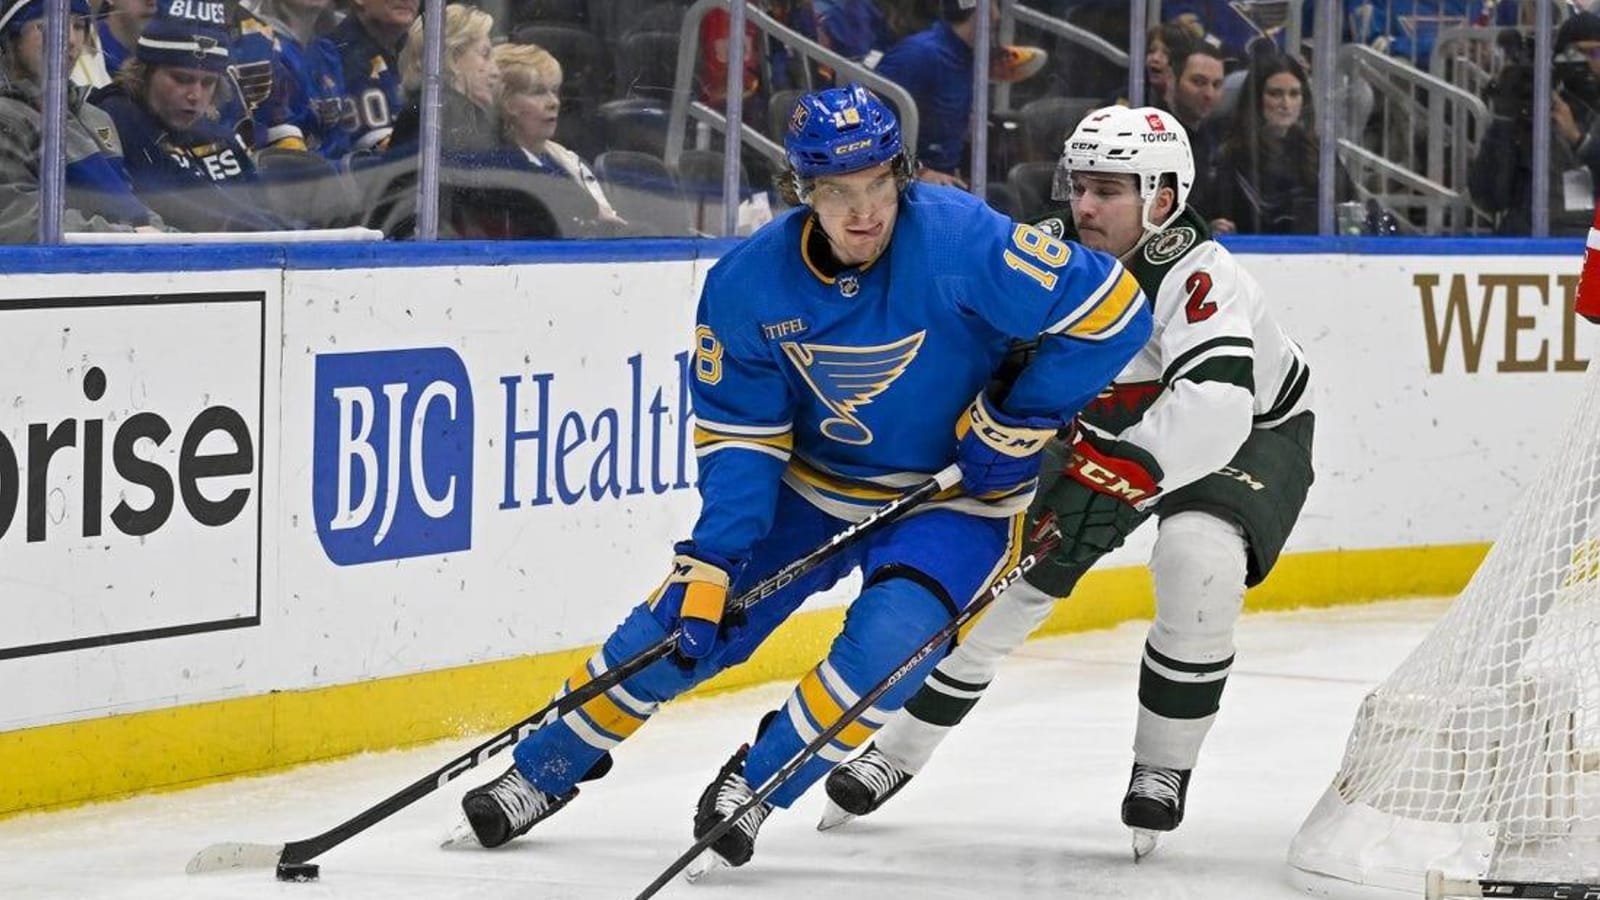 St. Louis Blues vs. Montreal Canadiens preview, prediction, pick: Can Blues keep it going on the road?